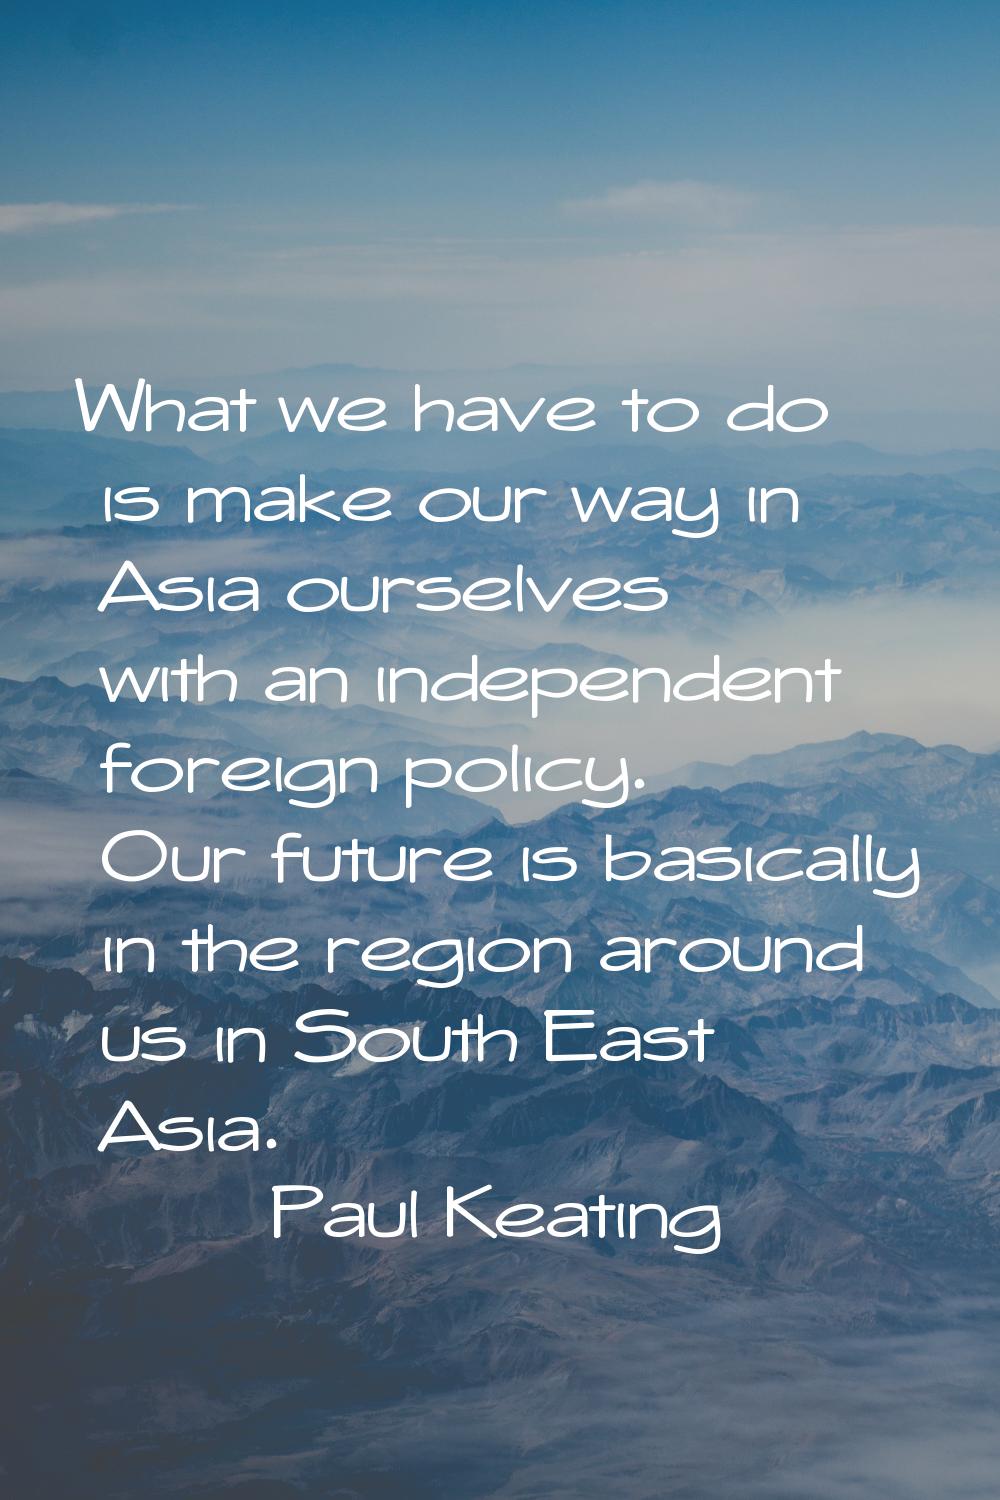 What we have to do is make our way in Asia ourselves with an independent foreign policy. Our future